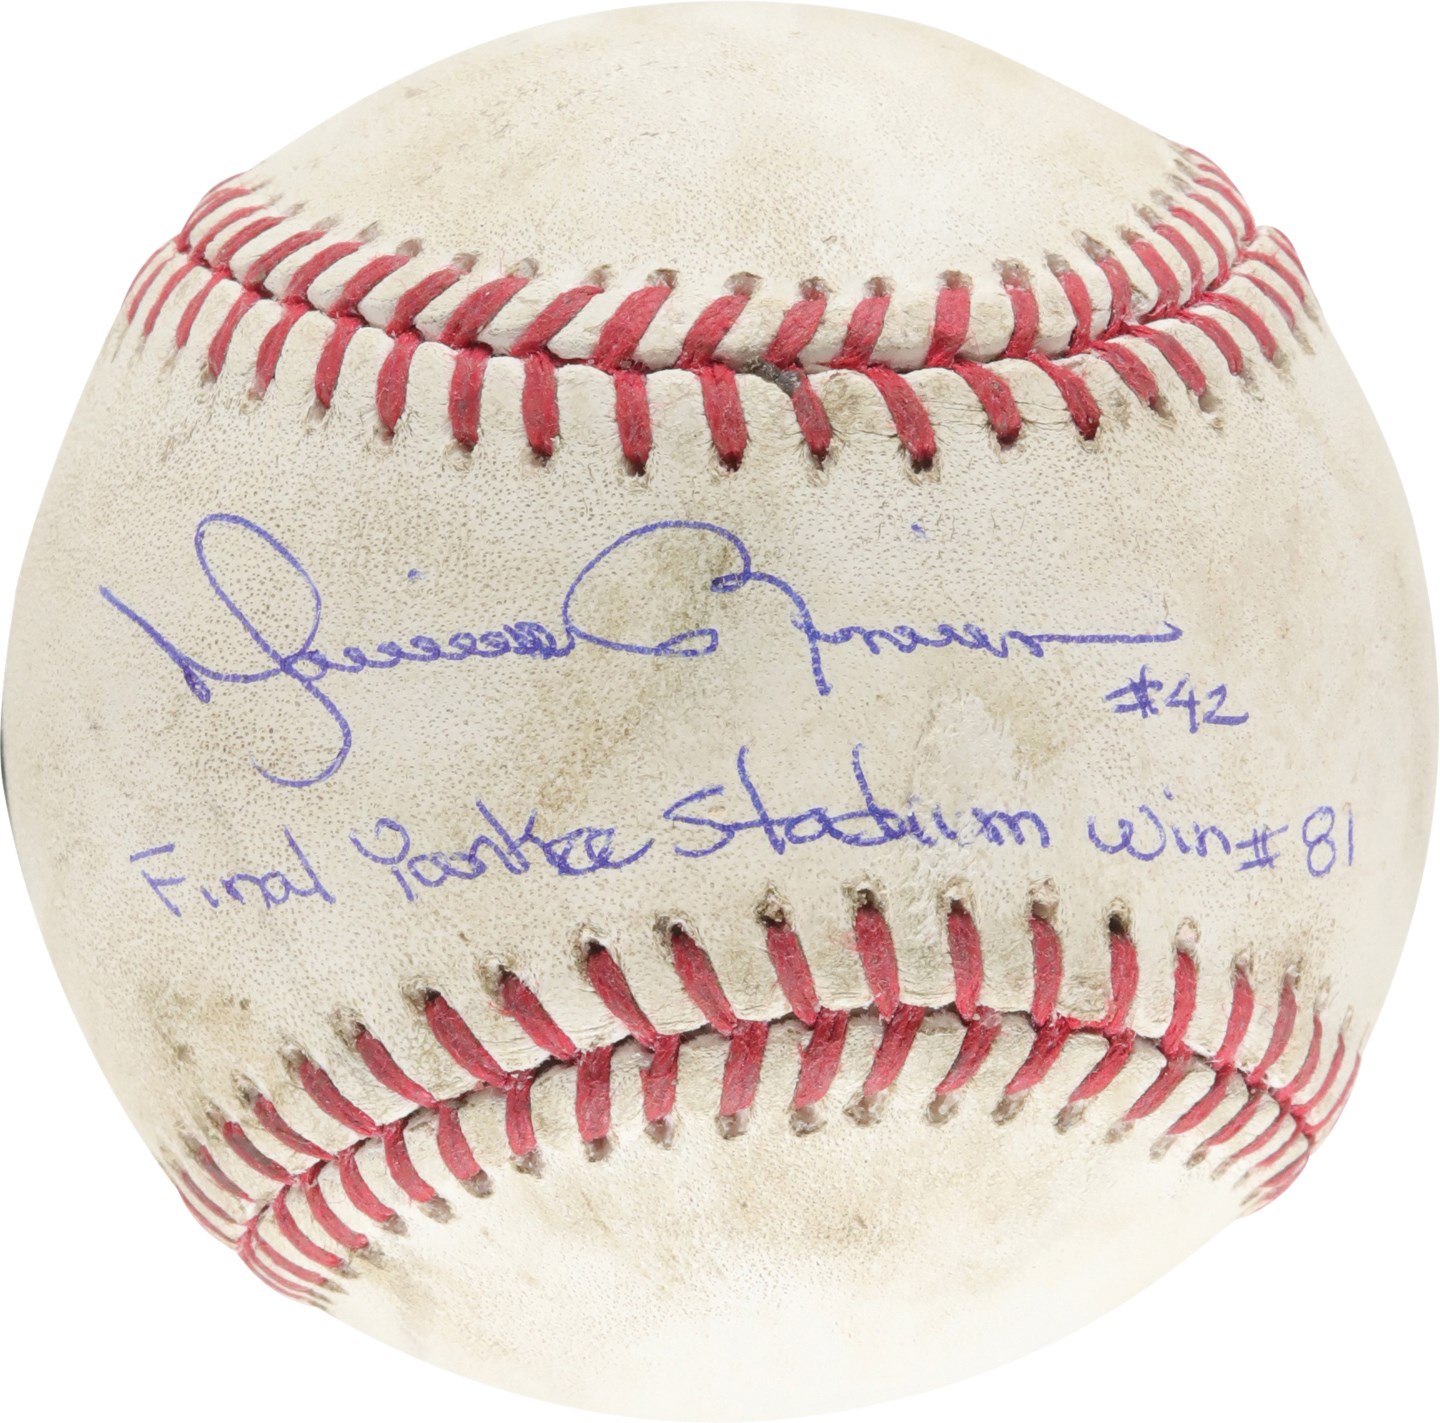 Baseball Autographs - 9/8/13 Mariano Rivera Signed Inscribed Game Used Baseball from Final Yankee Stadium Win (MLB and PSA GEM MINT 10 Auto)